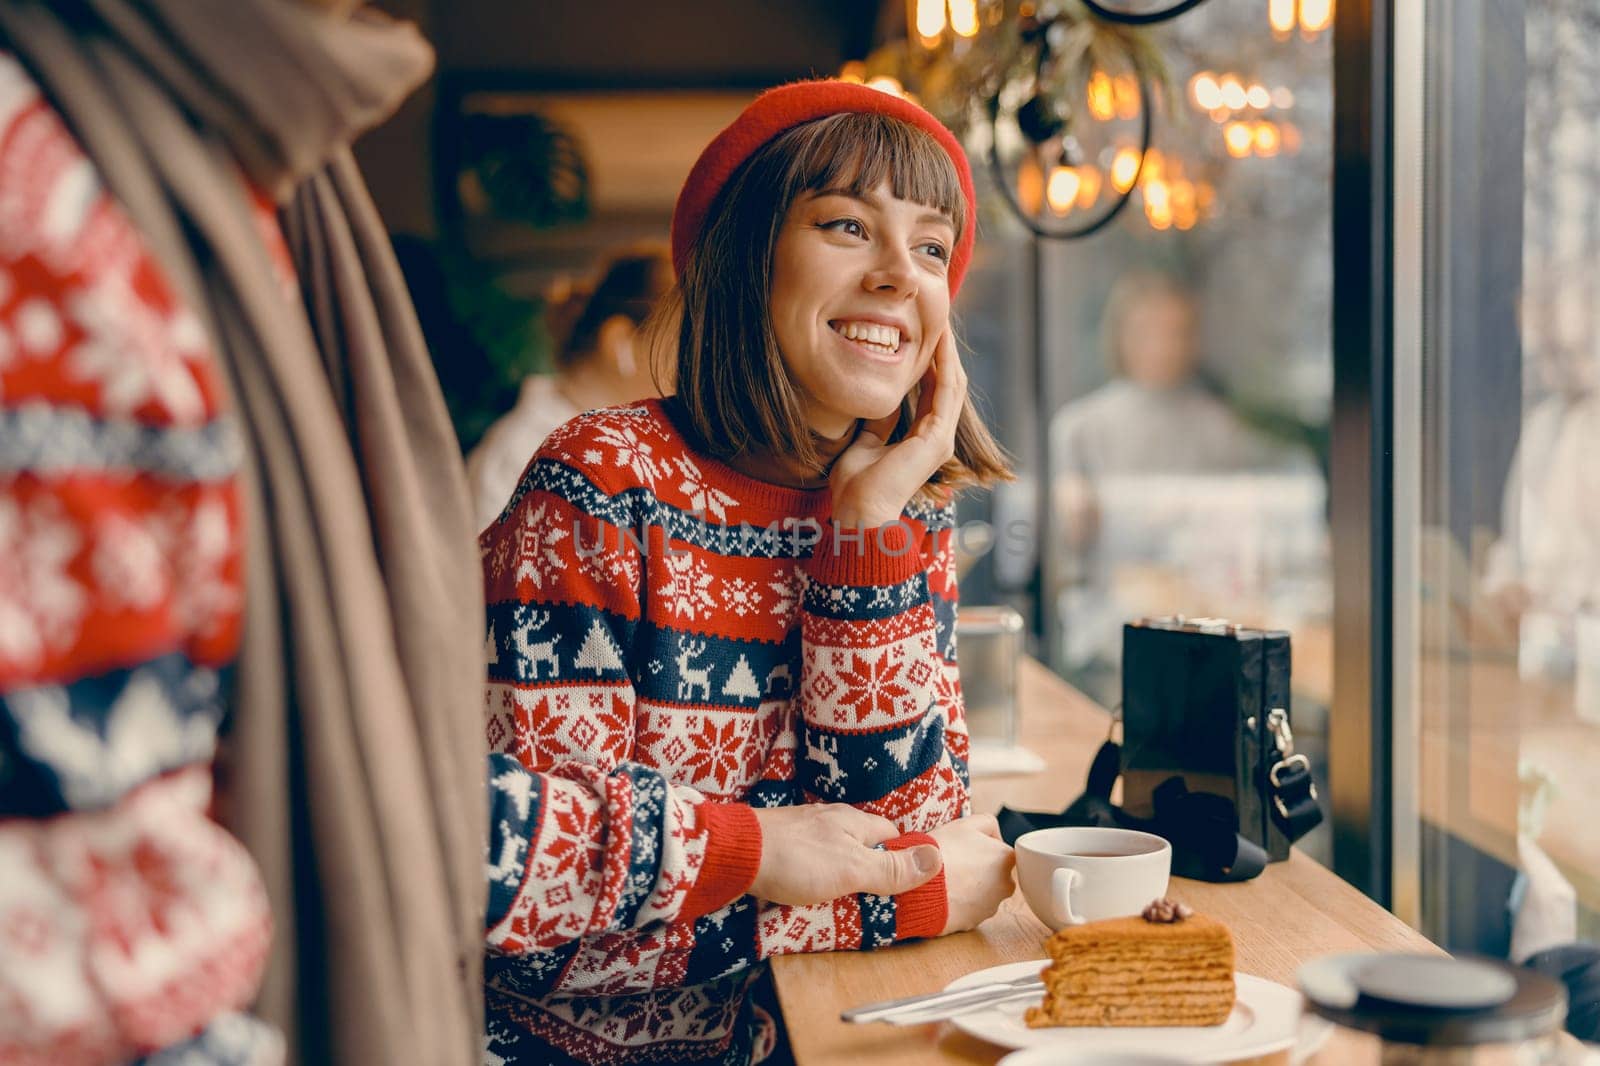 Radiant young woman in a Christmas sweater shares a joyful moment at a cafe by Yaroslav_astakhov